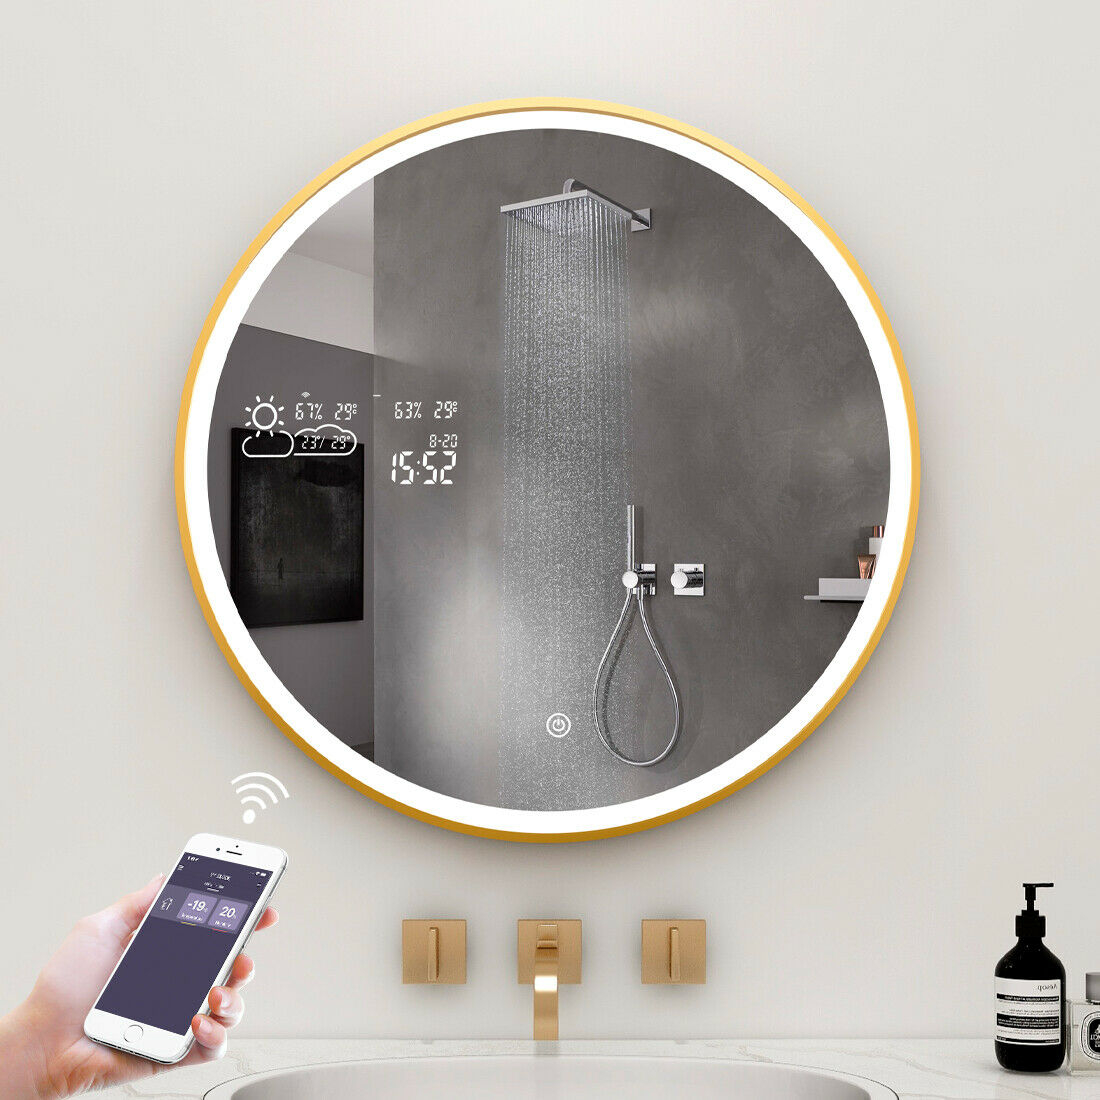 High-quality Smart LED Bathroom Mirror look cool and provide a variety of style